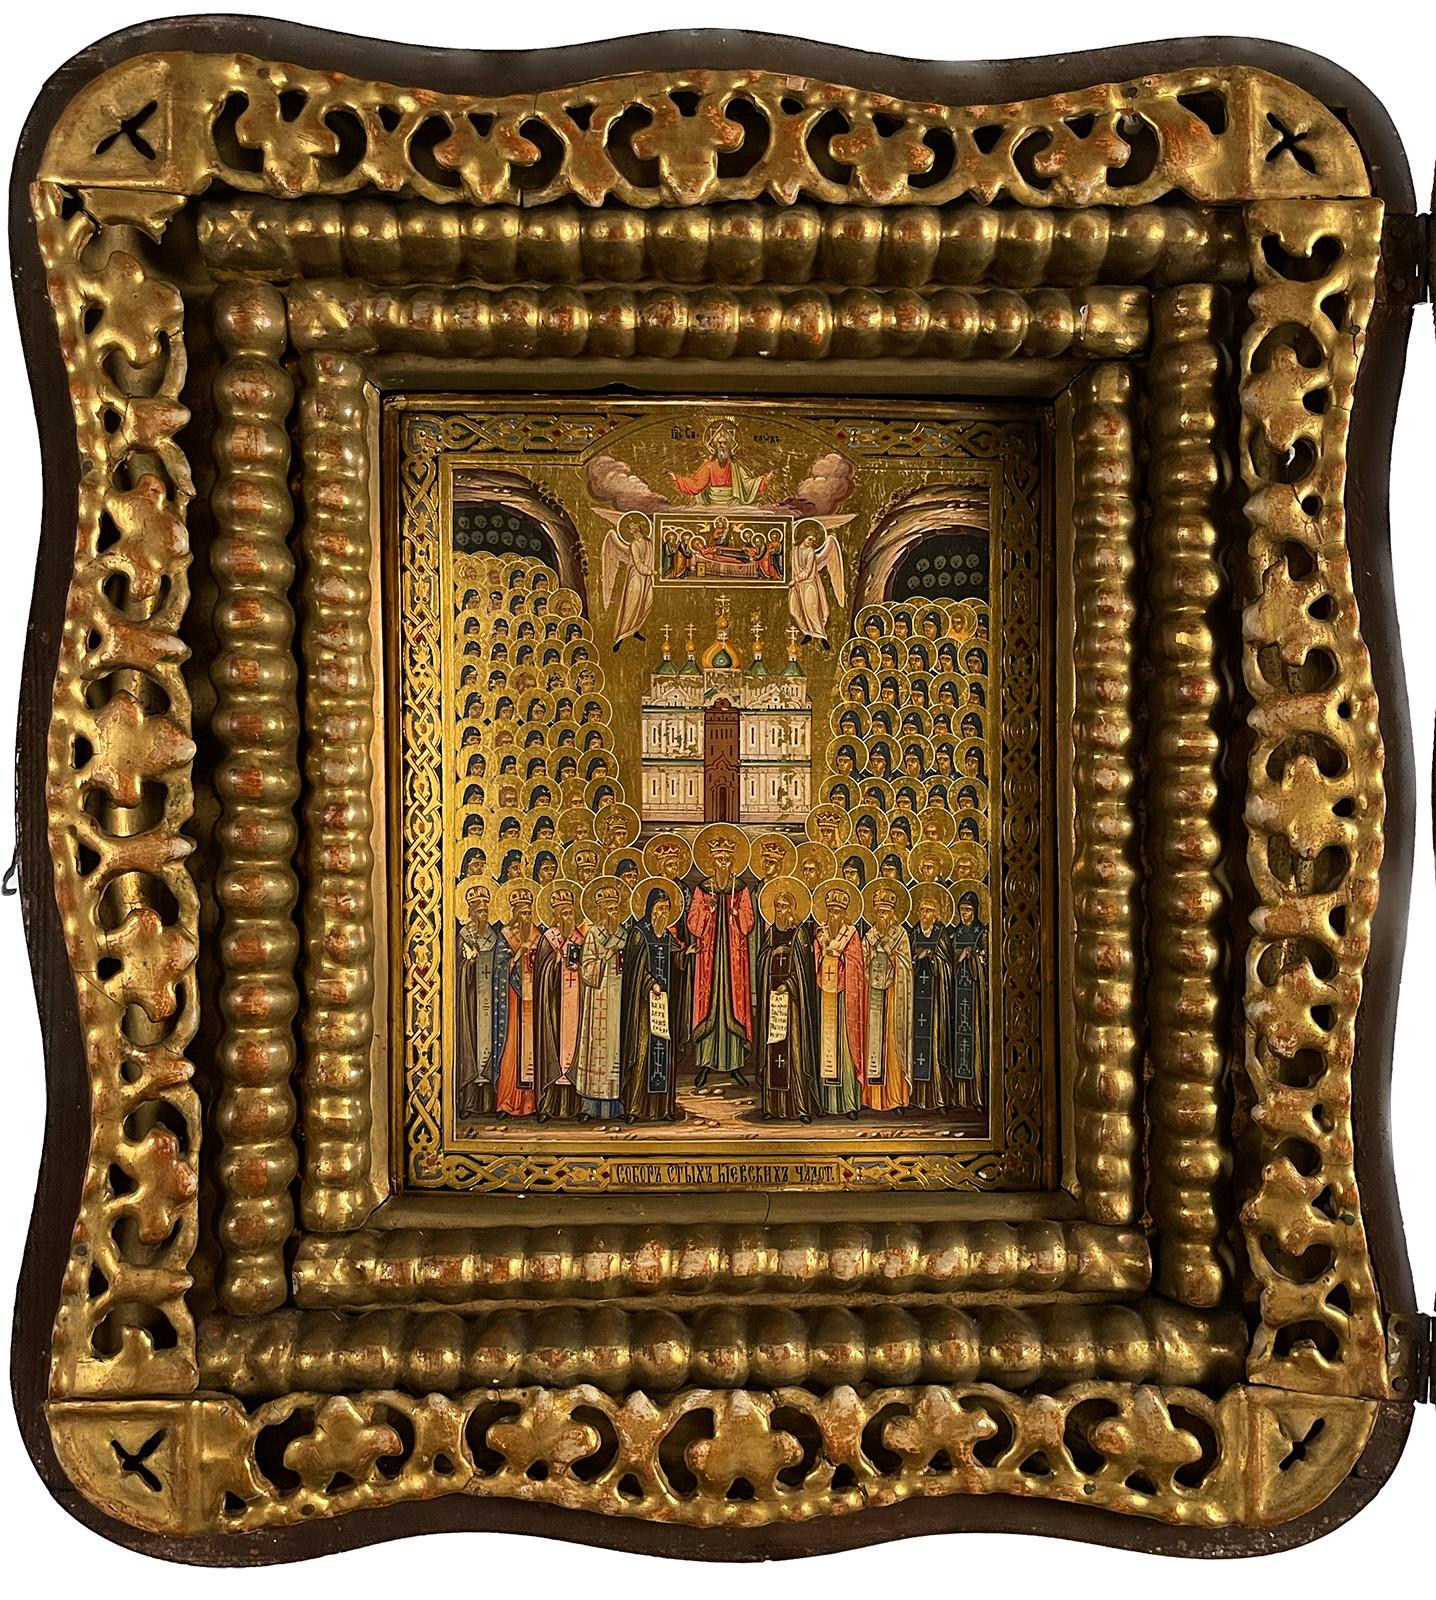 A 19th century Russian Icon with giltwood and Cyrillic text enclosed in a shadowbox frame. The bottom translates to 